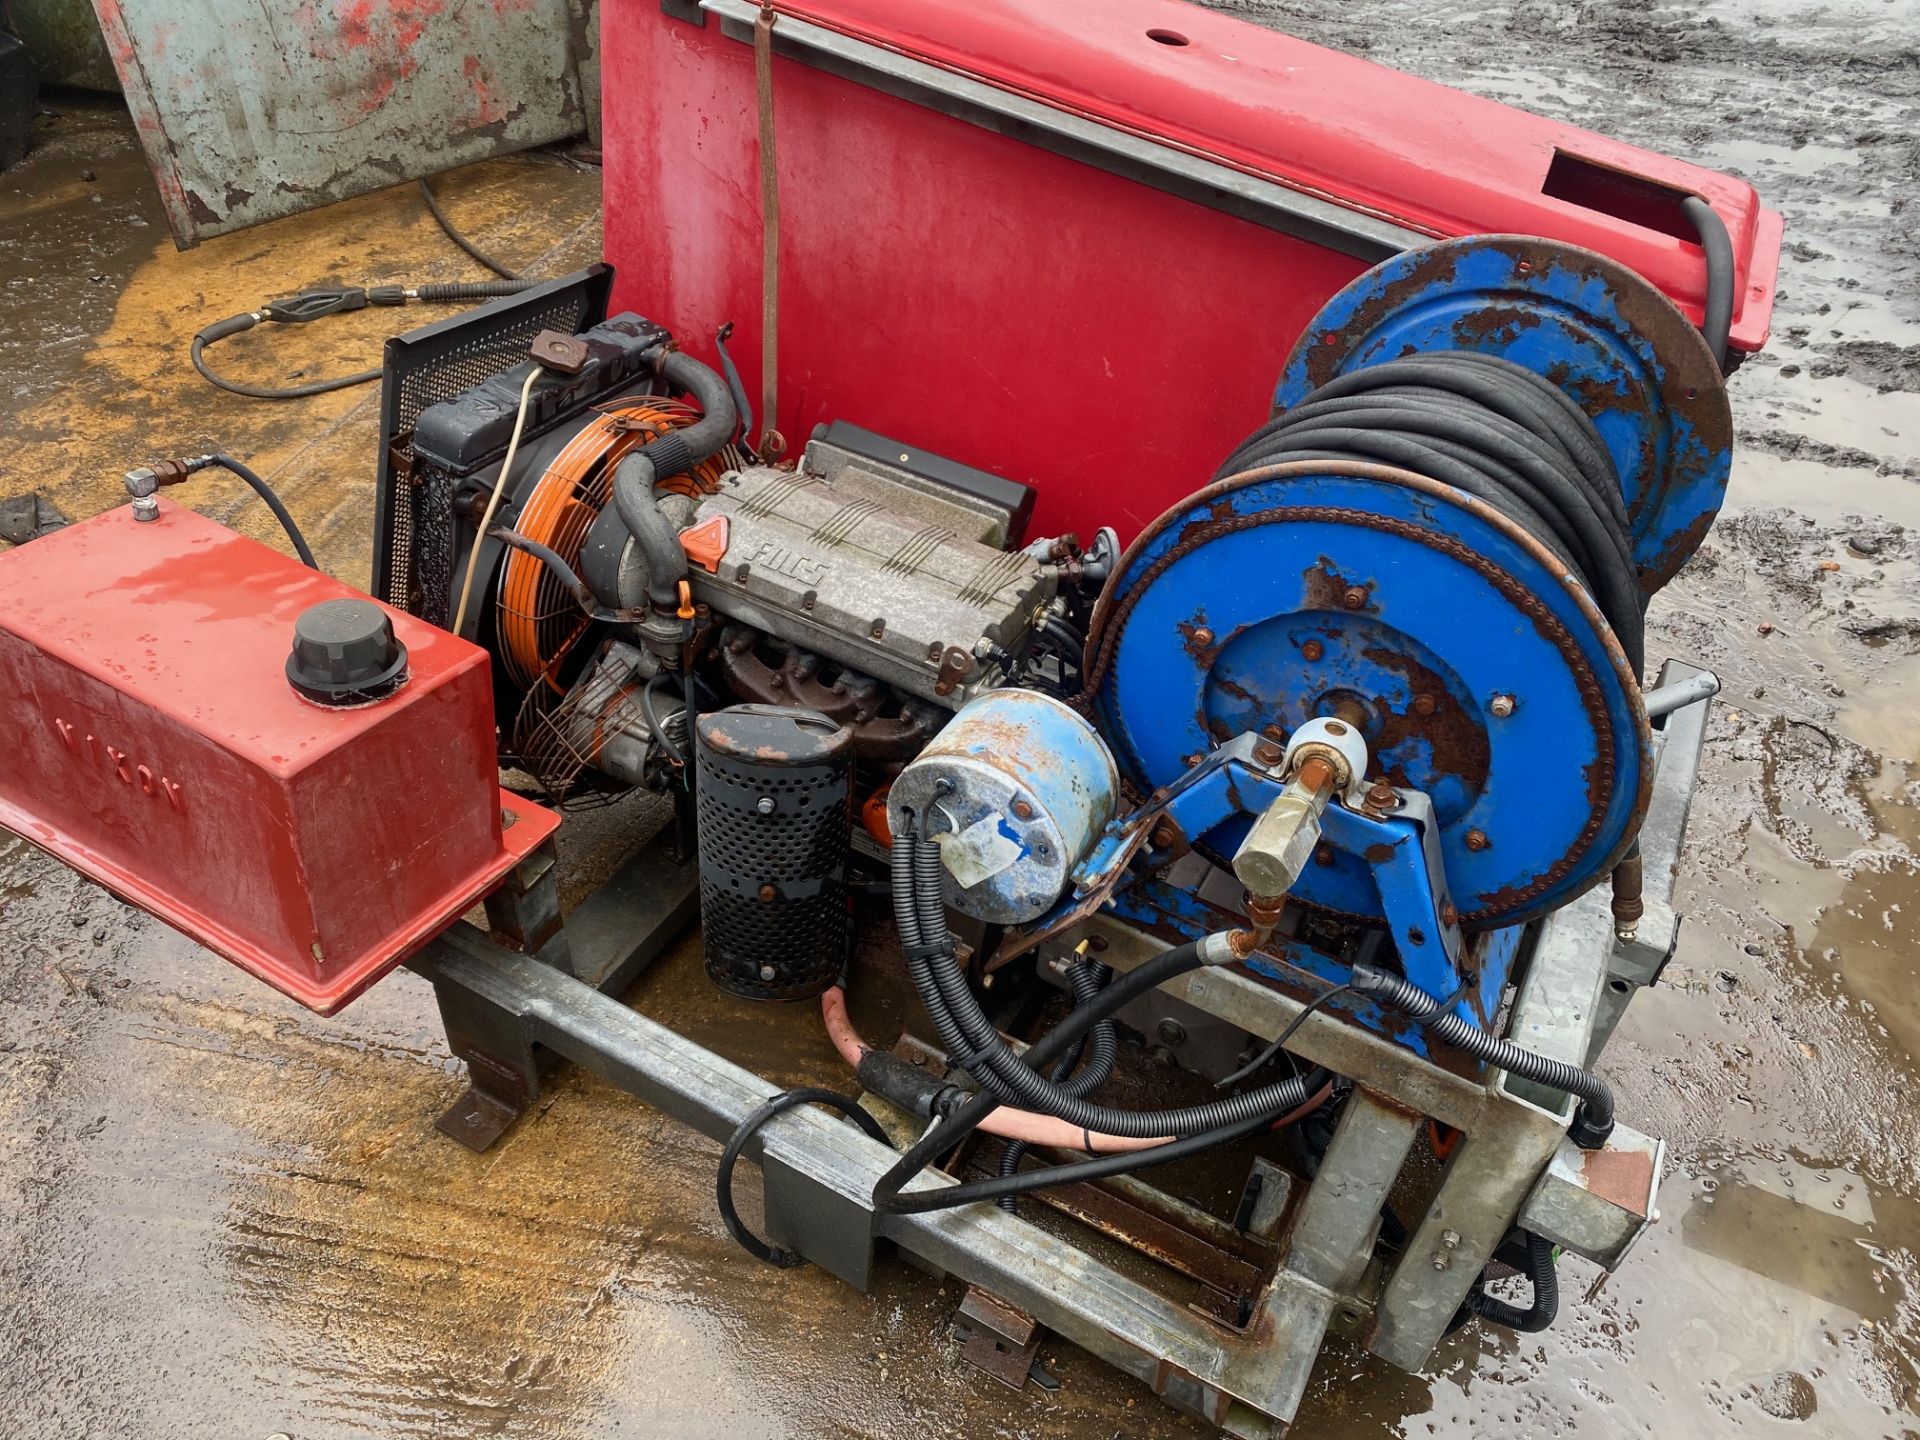 NIXON 40 HIGH POWERED WATER DRAIN JETTER, SOLD AS SPARES AND REPAIRS *PLUS VAT* - Image 2 of 3